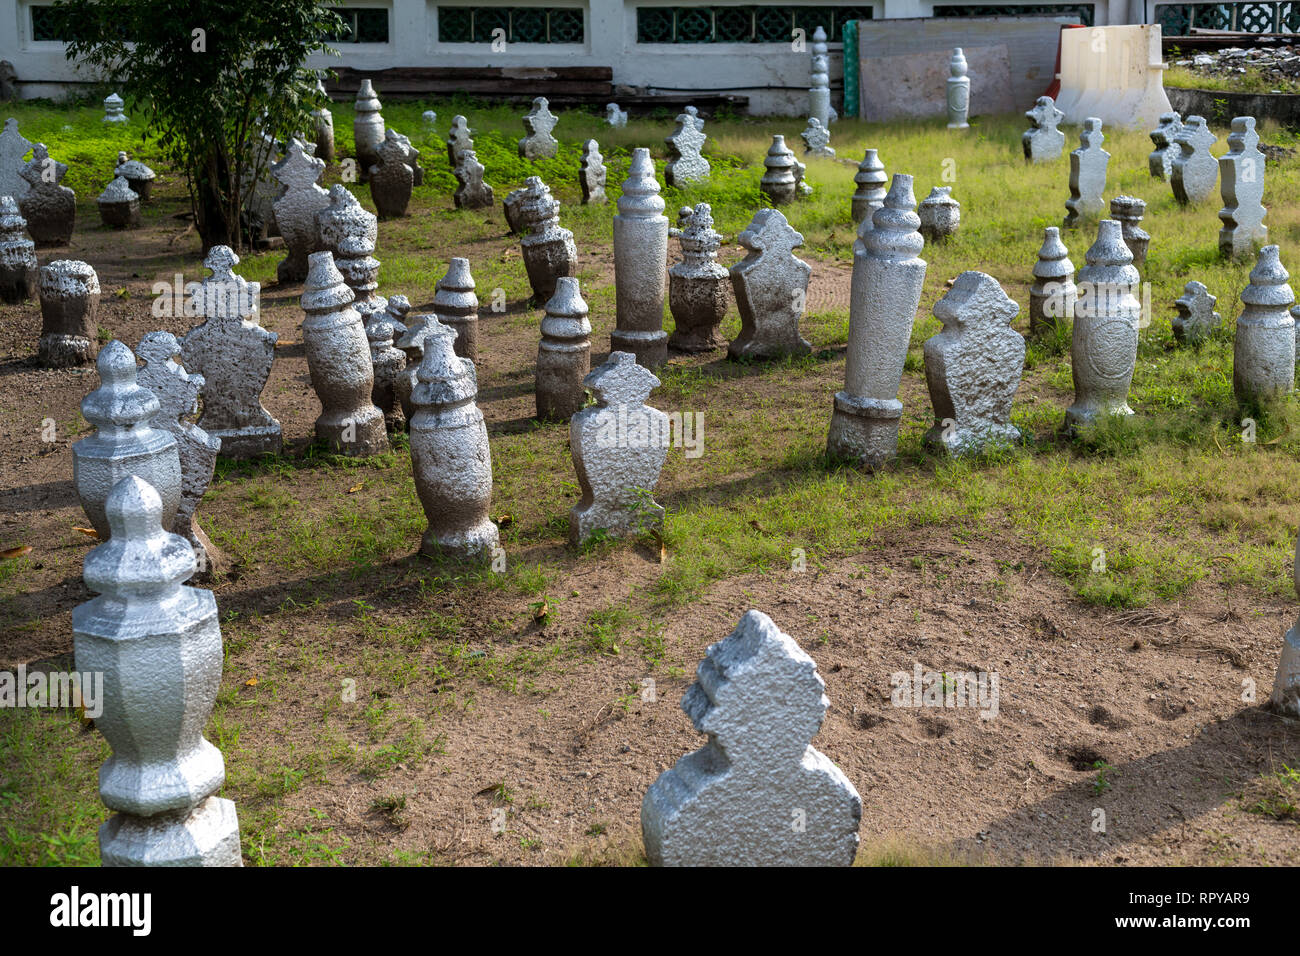 Gravestones in Cemetery of Kampung Kling Mosque, Melaka, Malaysia.  Round for men, shaped for women. Stock Photo